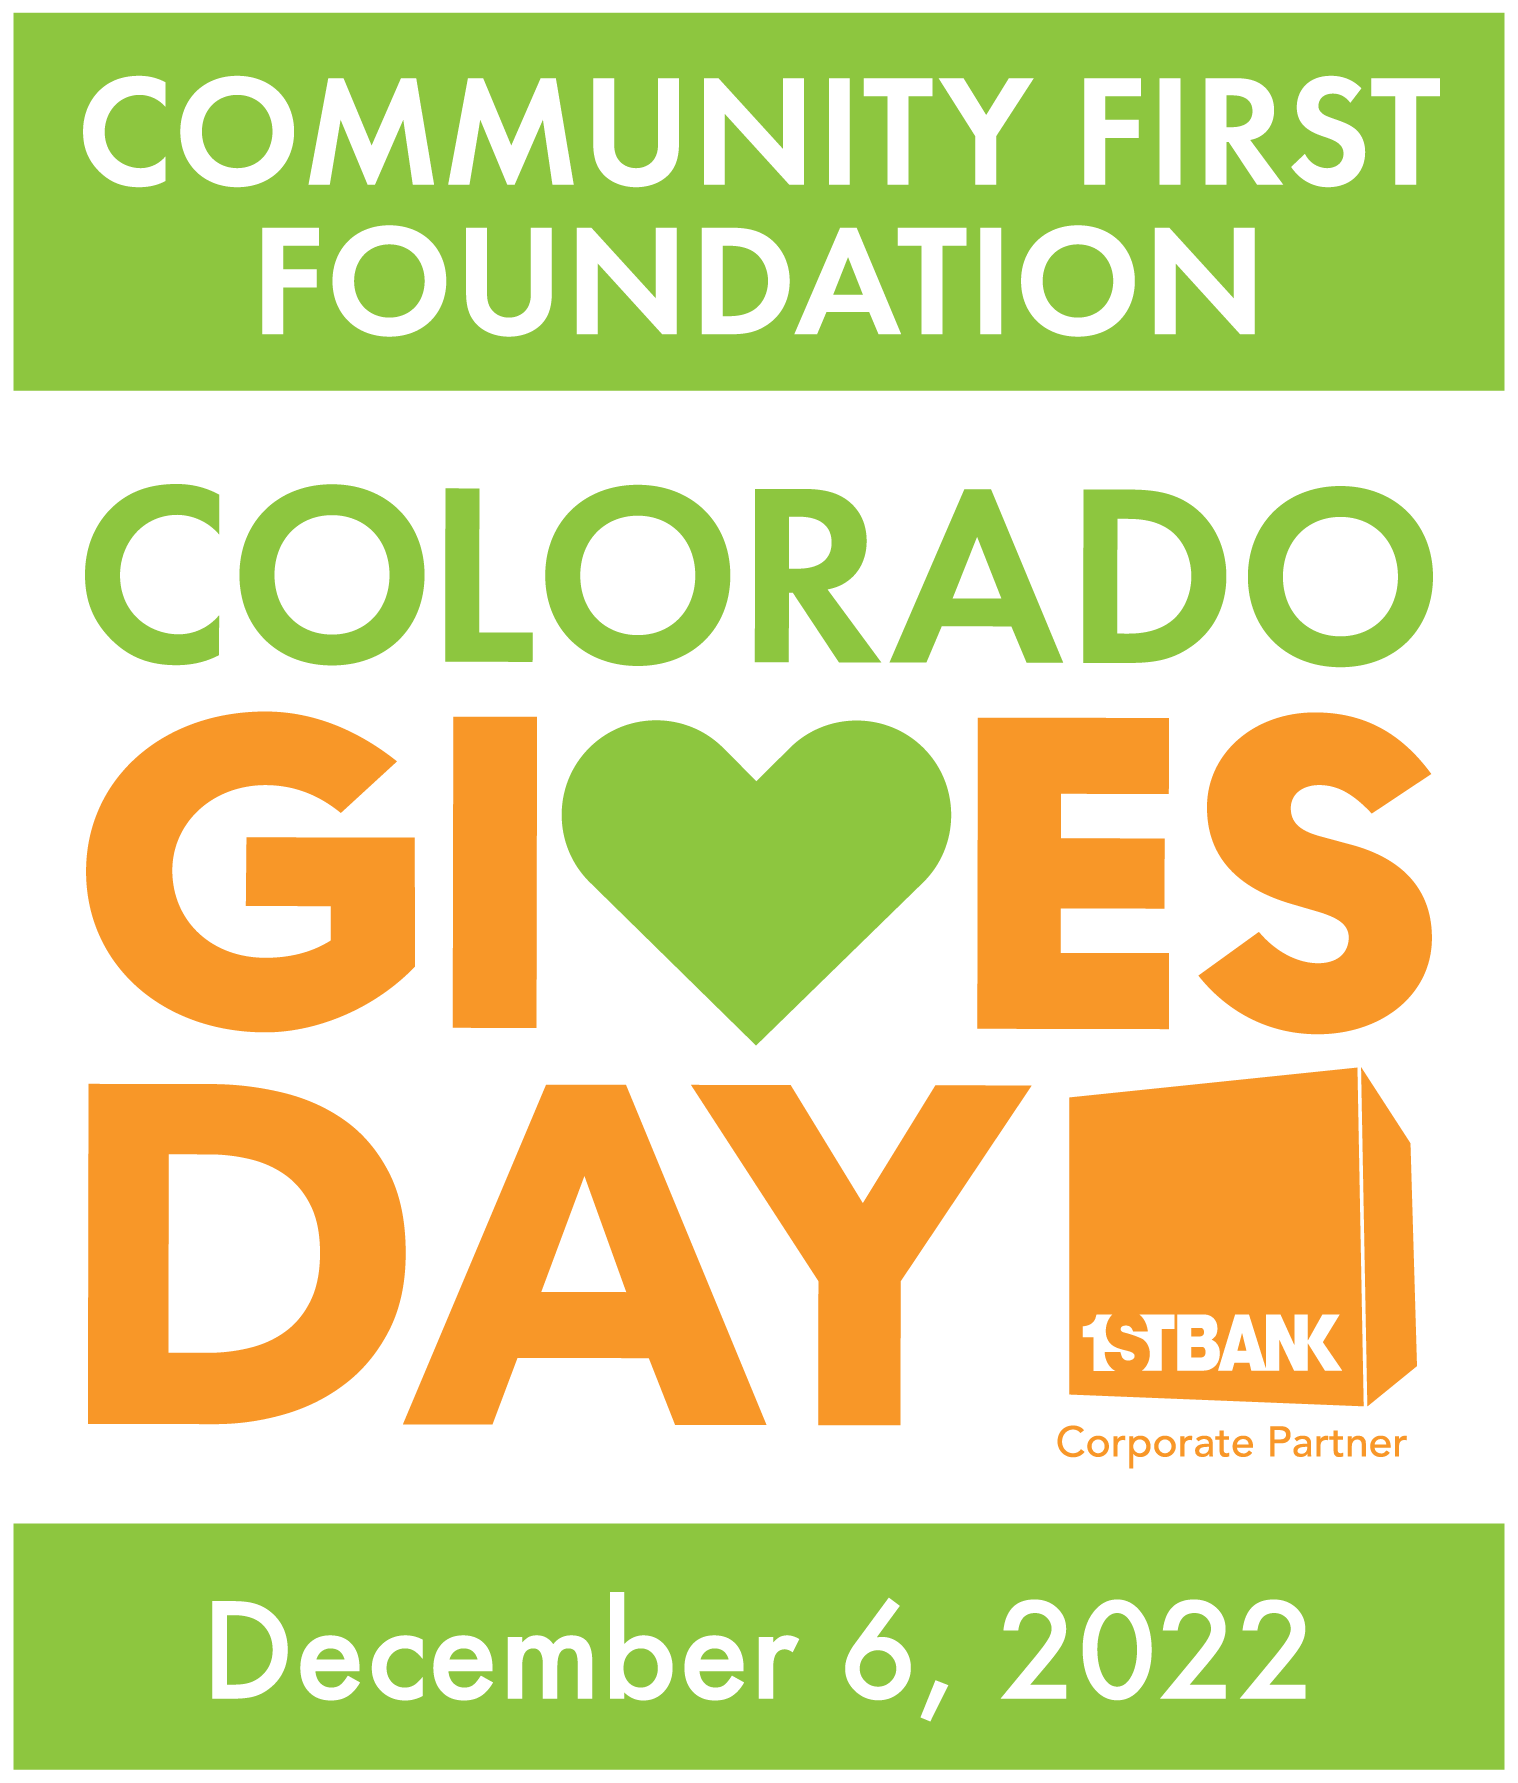 An ad-like graphic announcing Colorado Gives Day. The text of the graphic reads: Community First Foundation. Colorado Gives Day. December 6, 2022.